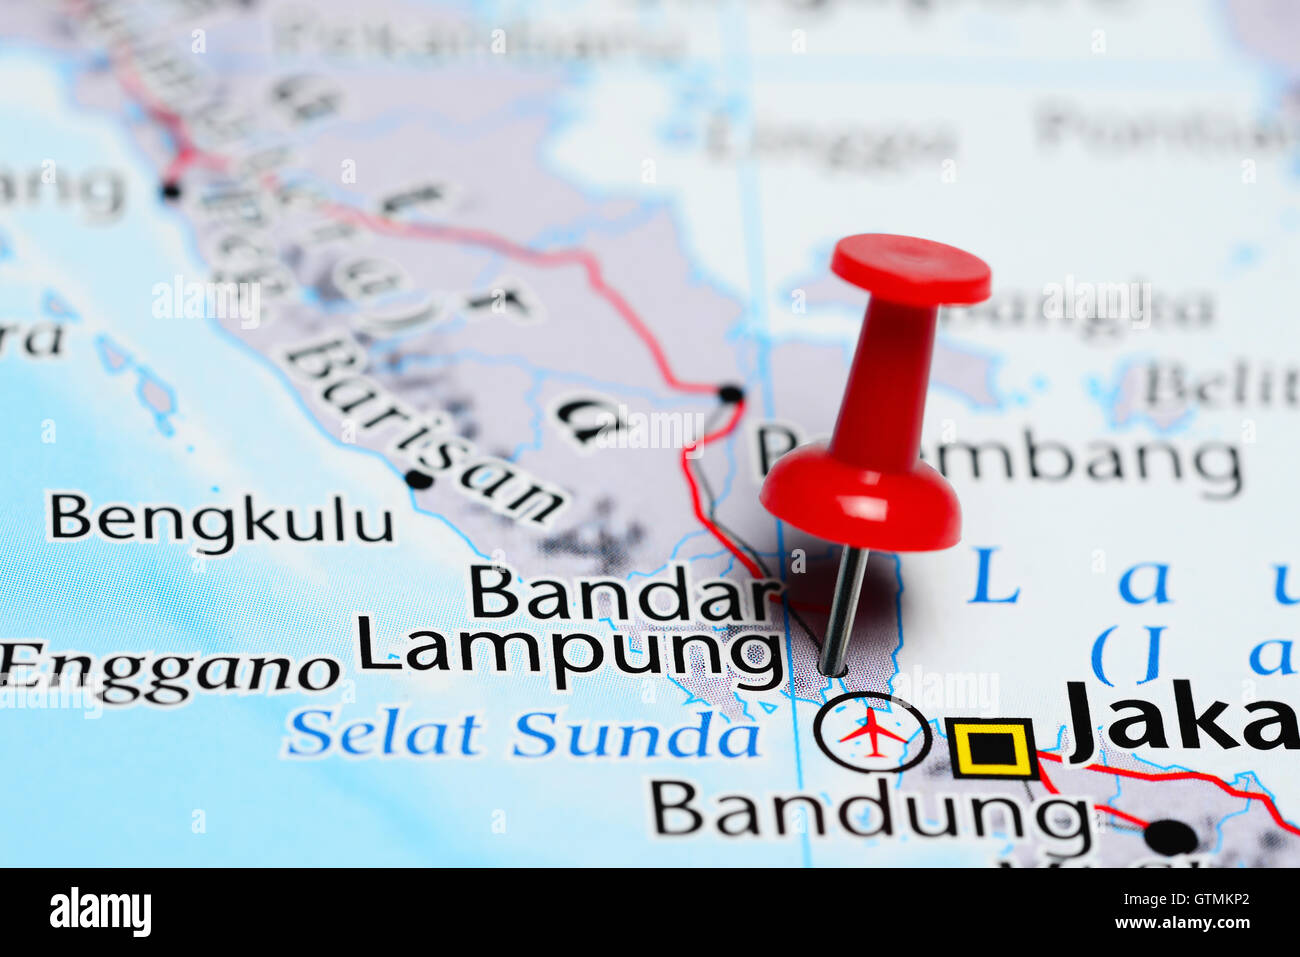 Bandar Lampung pinned on a map of Indonesia Stock Photo